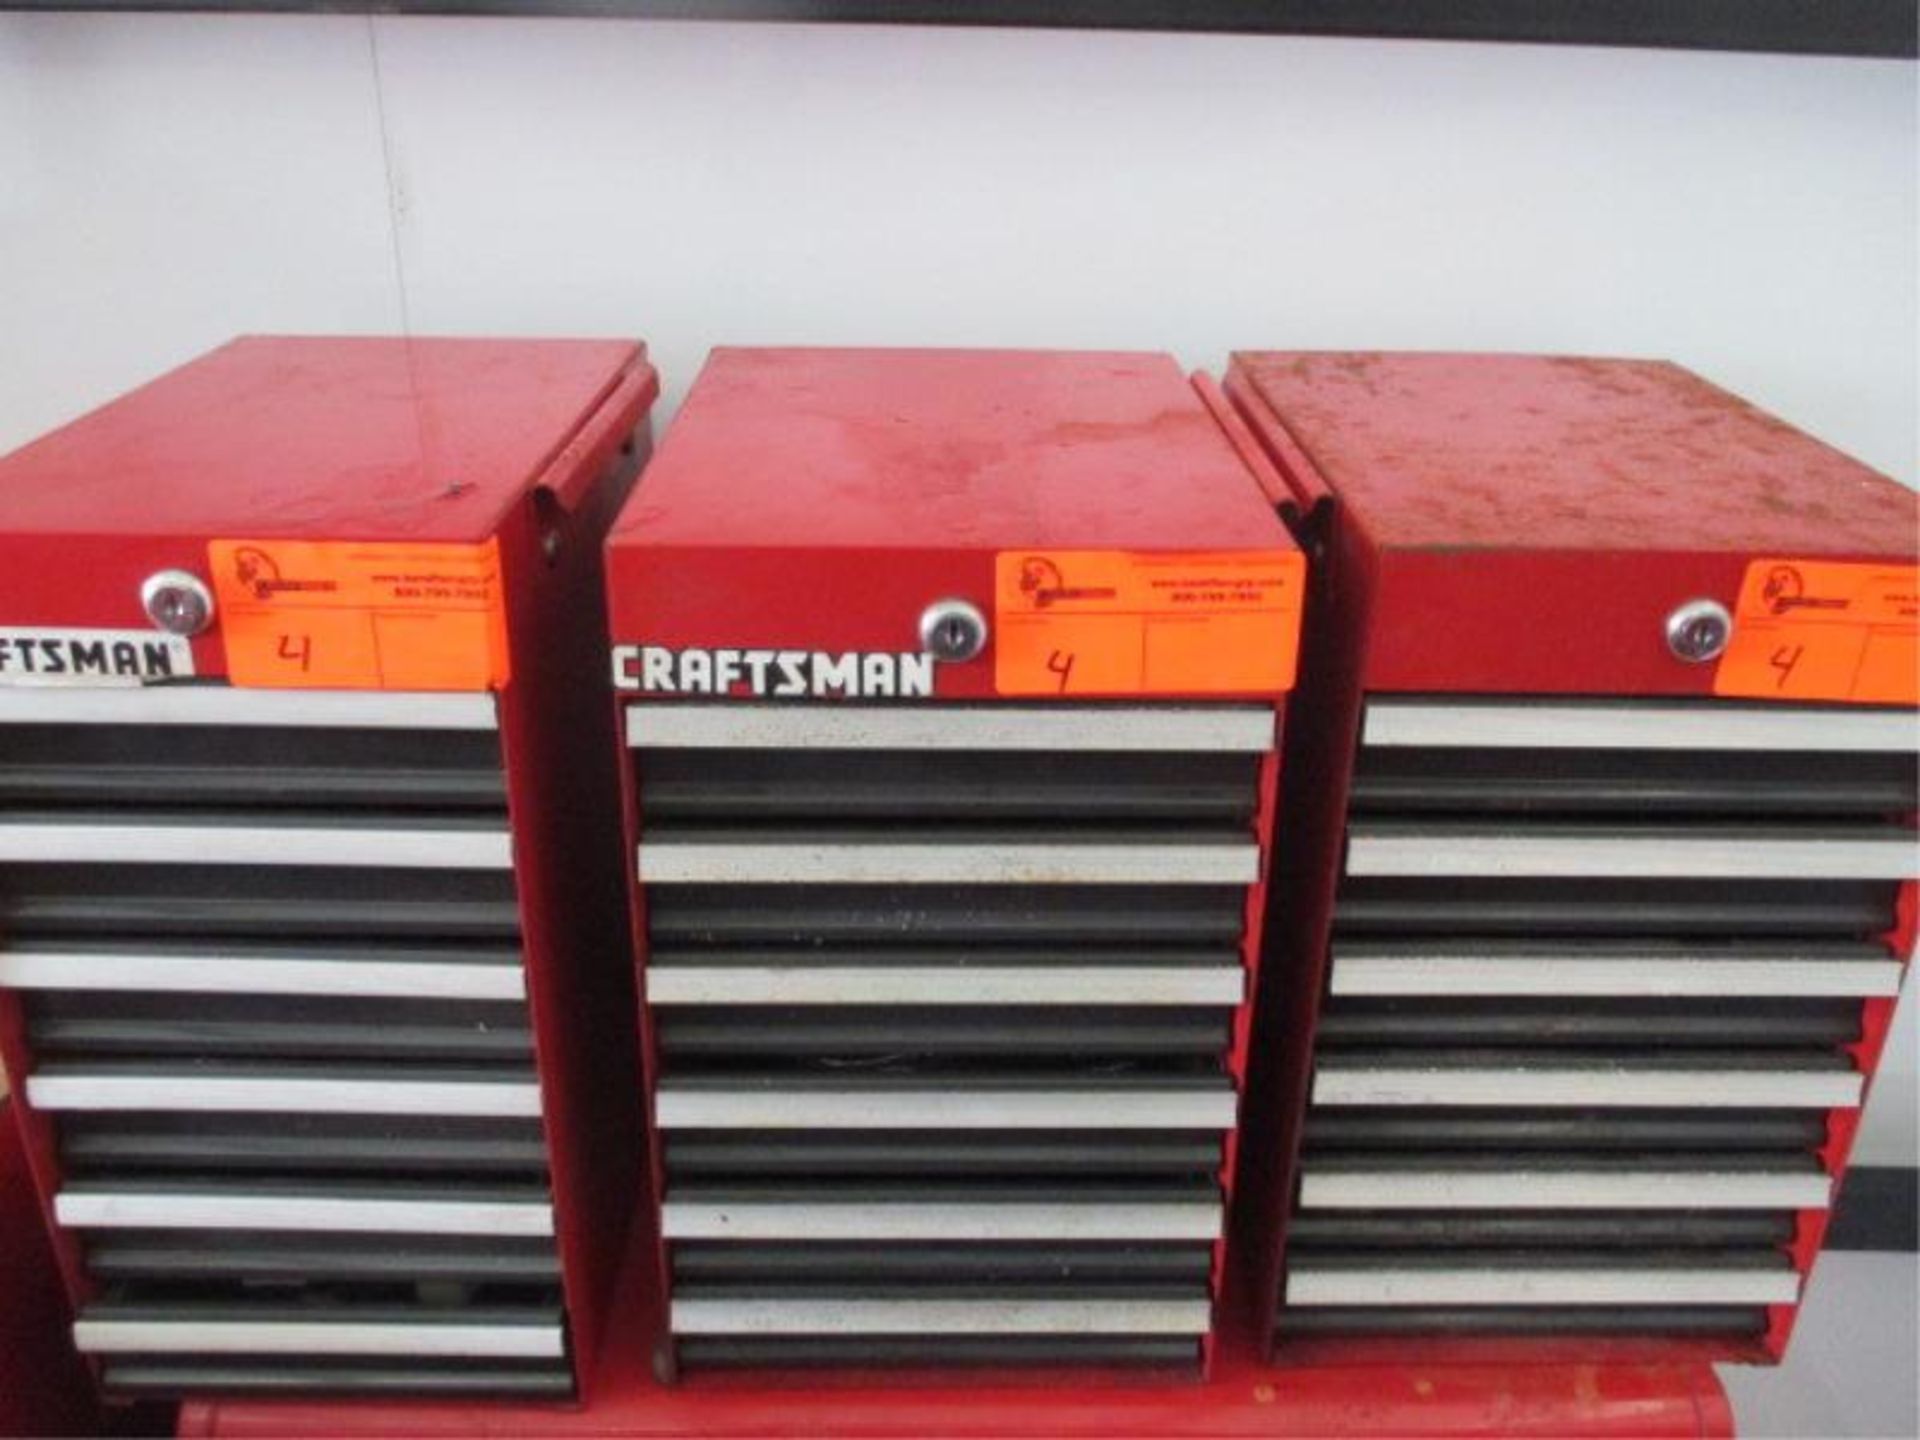 (3) Craftsman Small Tool Boxres, Red, 6 Drawers w/ Assorted Tools Including: Pliers, Screwdrivers,